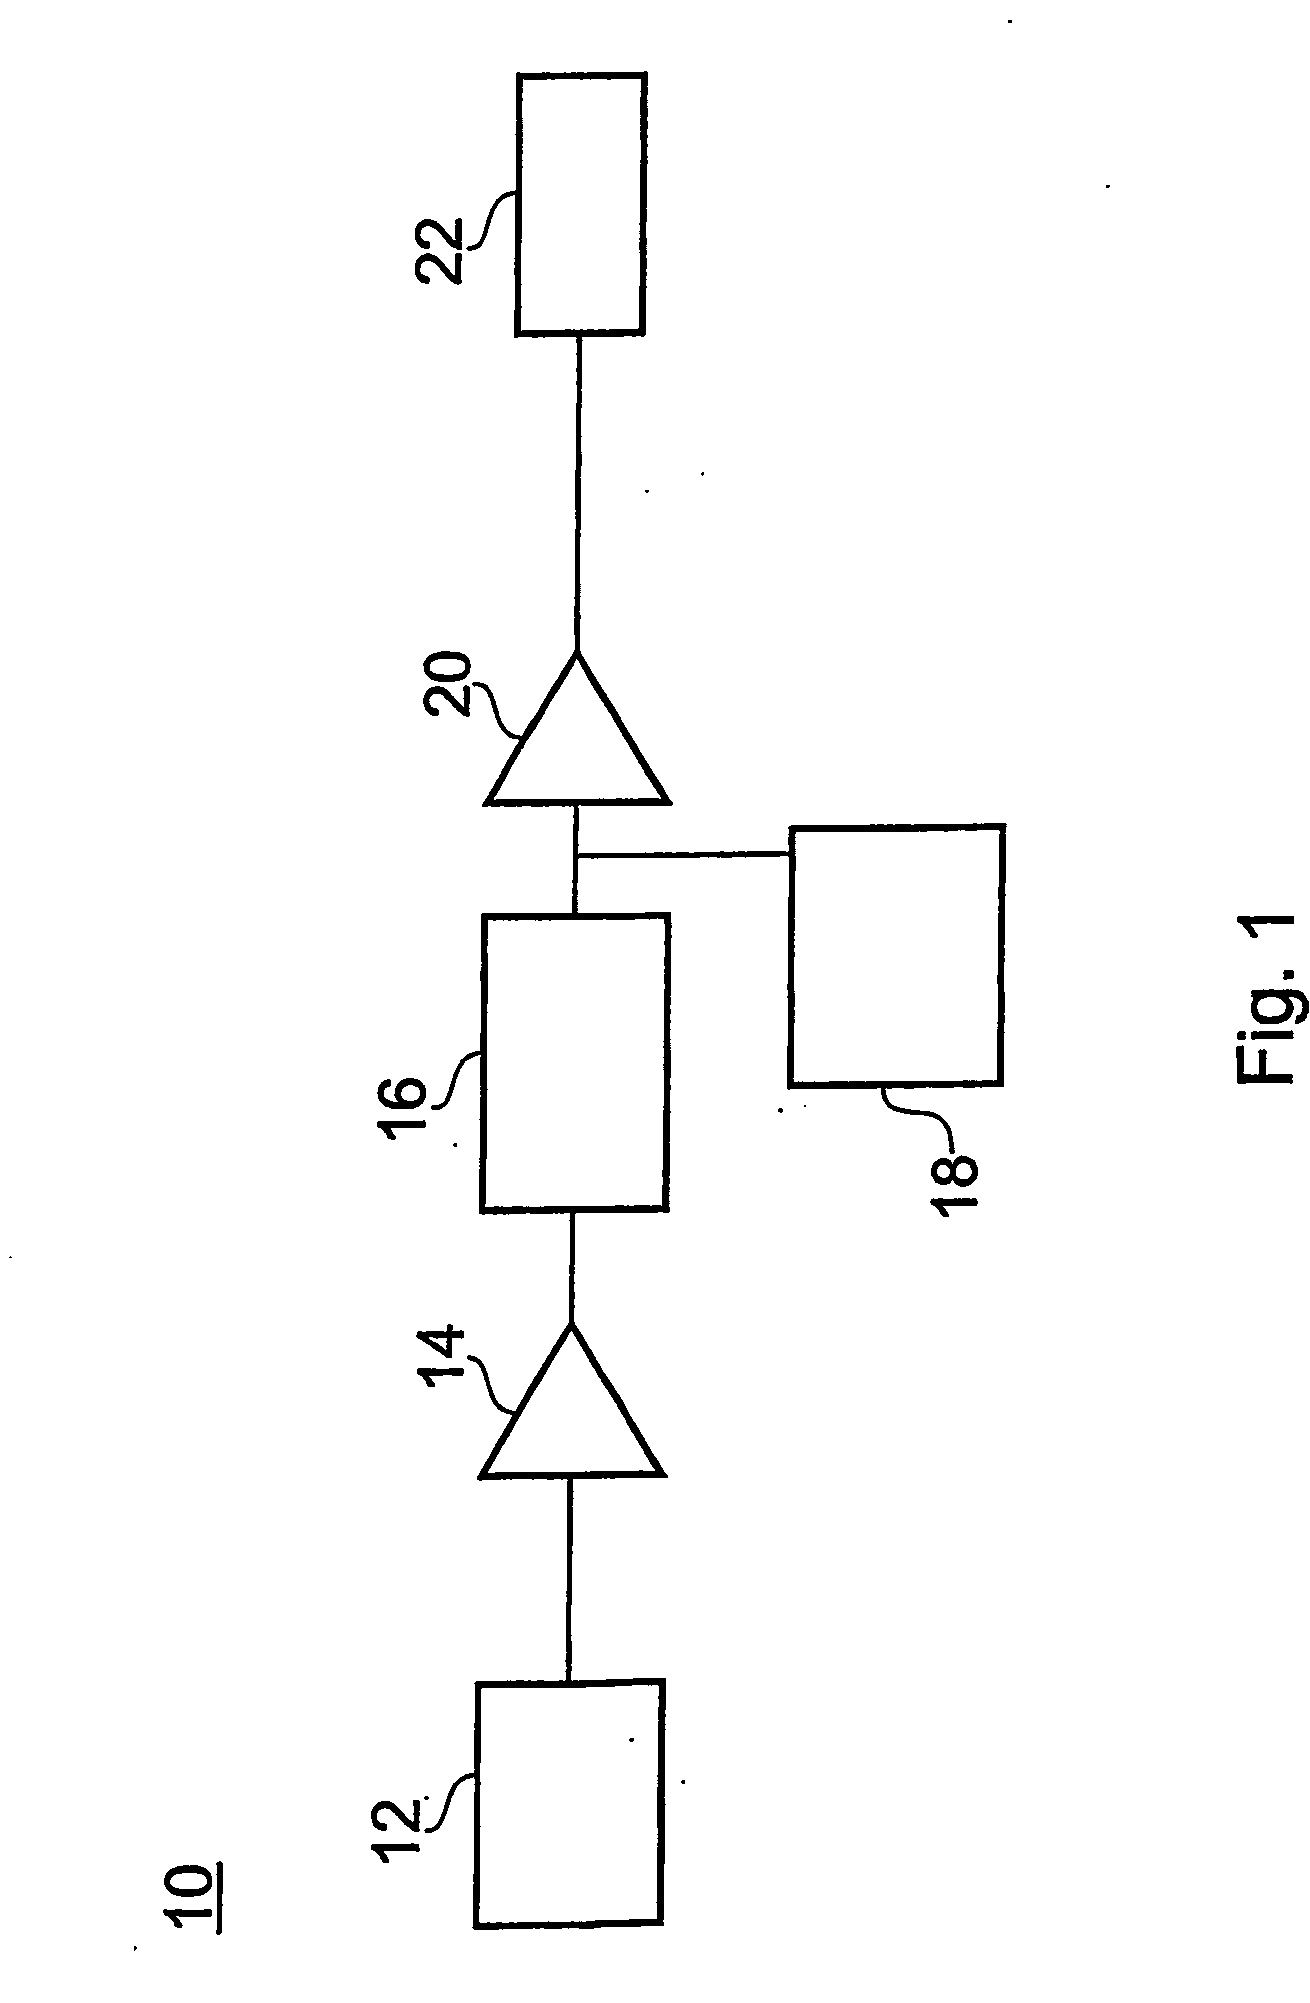 Circuit for power amplification